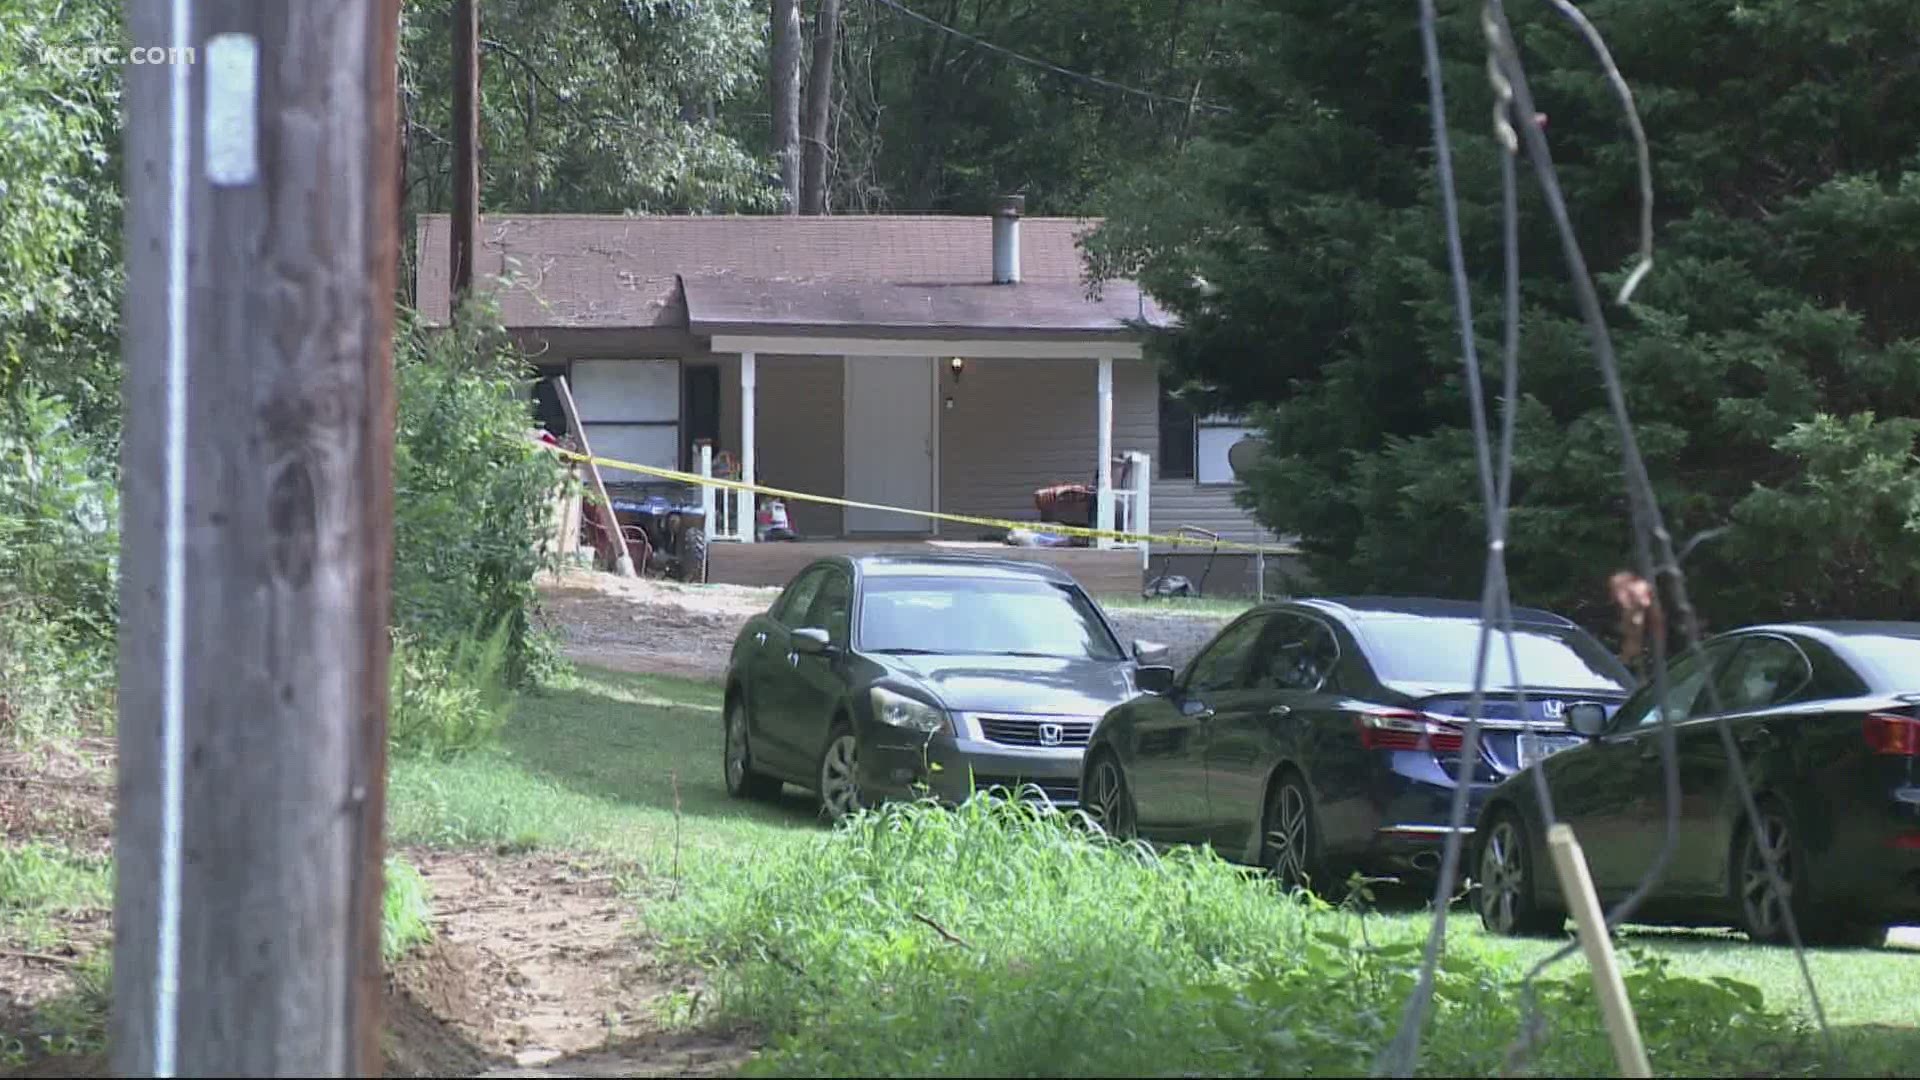 Deputies believe it started as a home invasion.